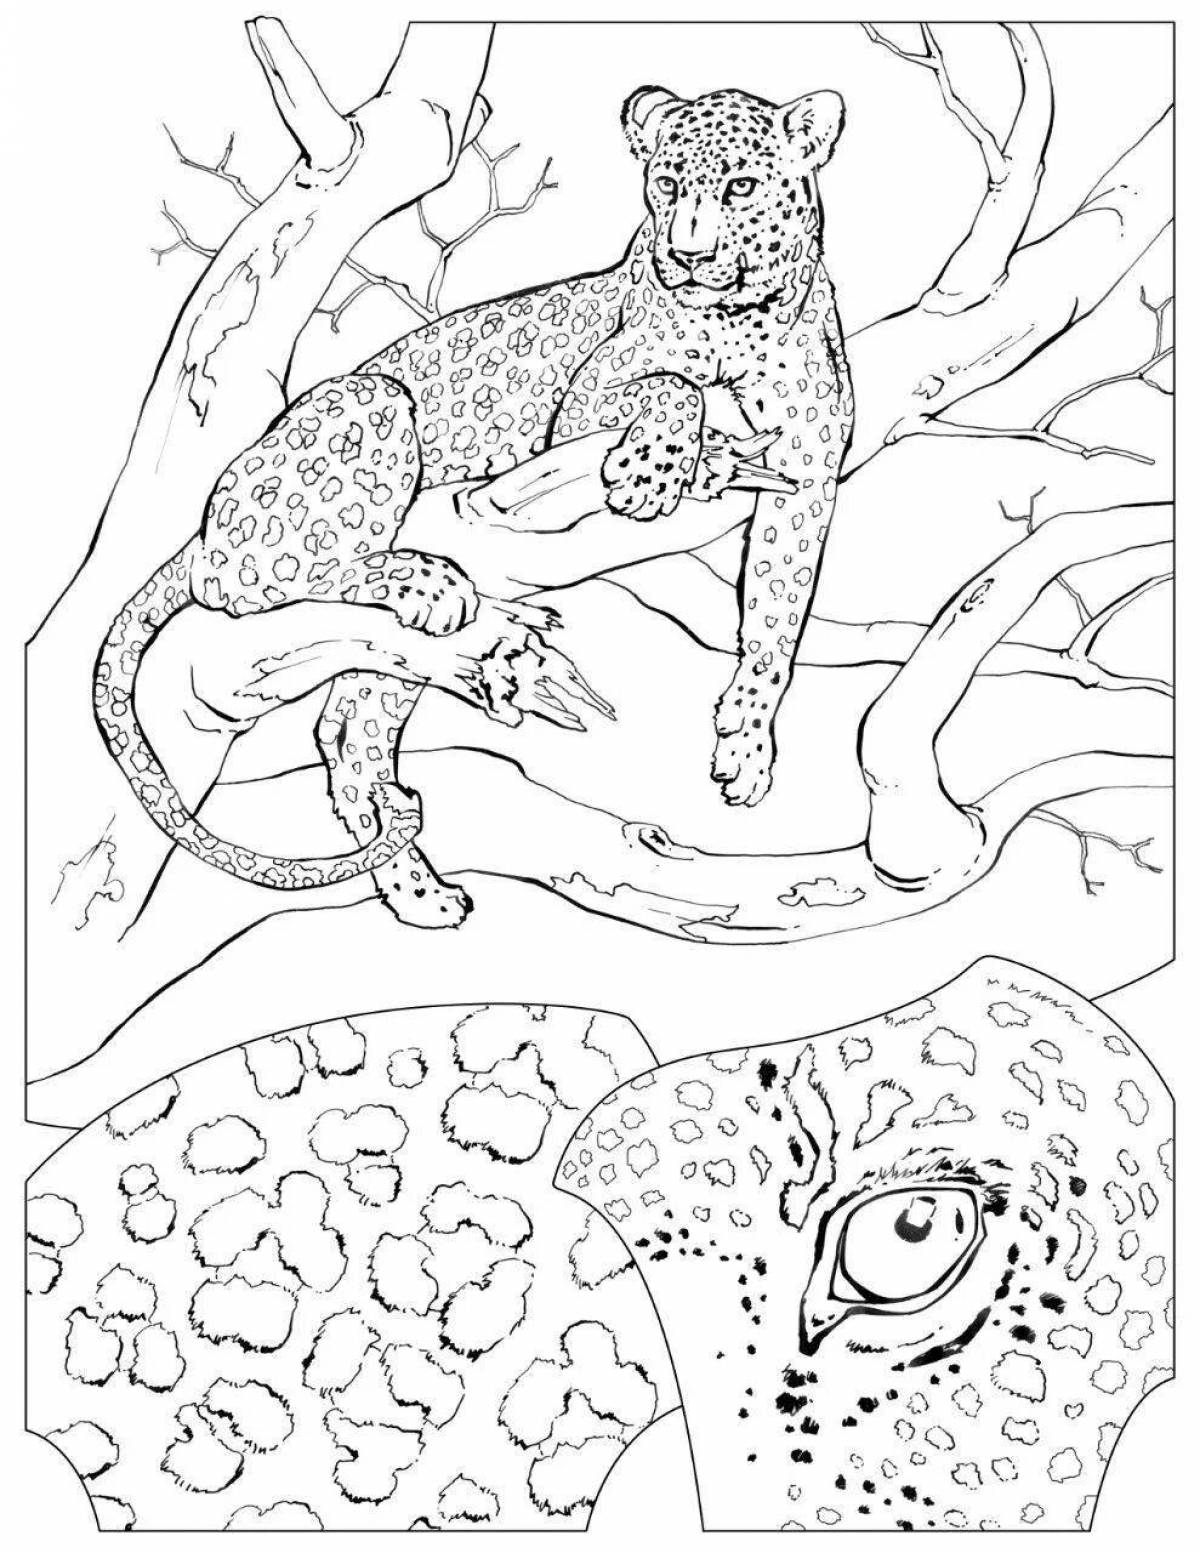 Amazing clouded leopard coloring page